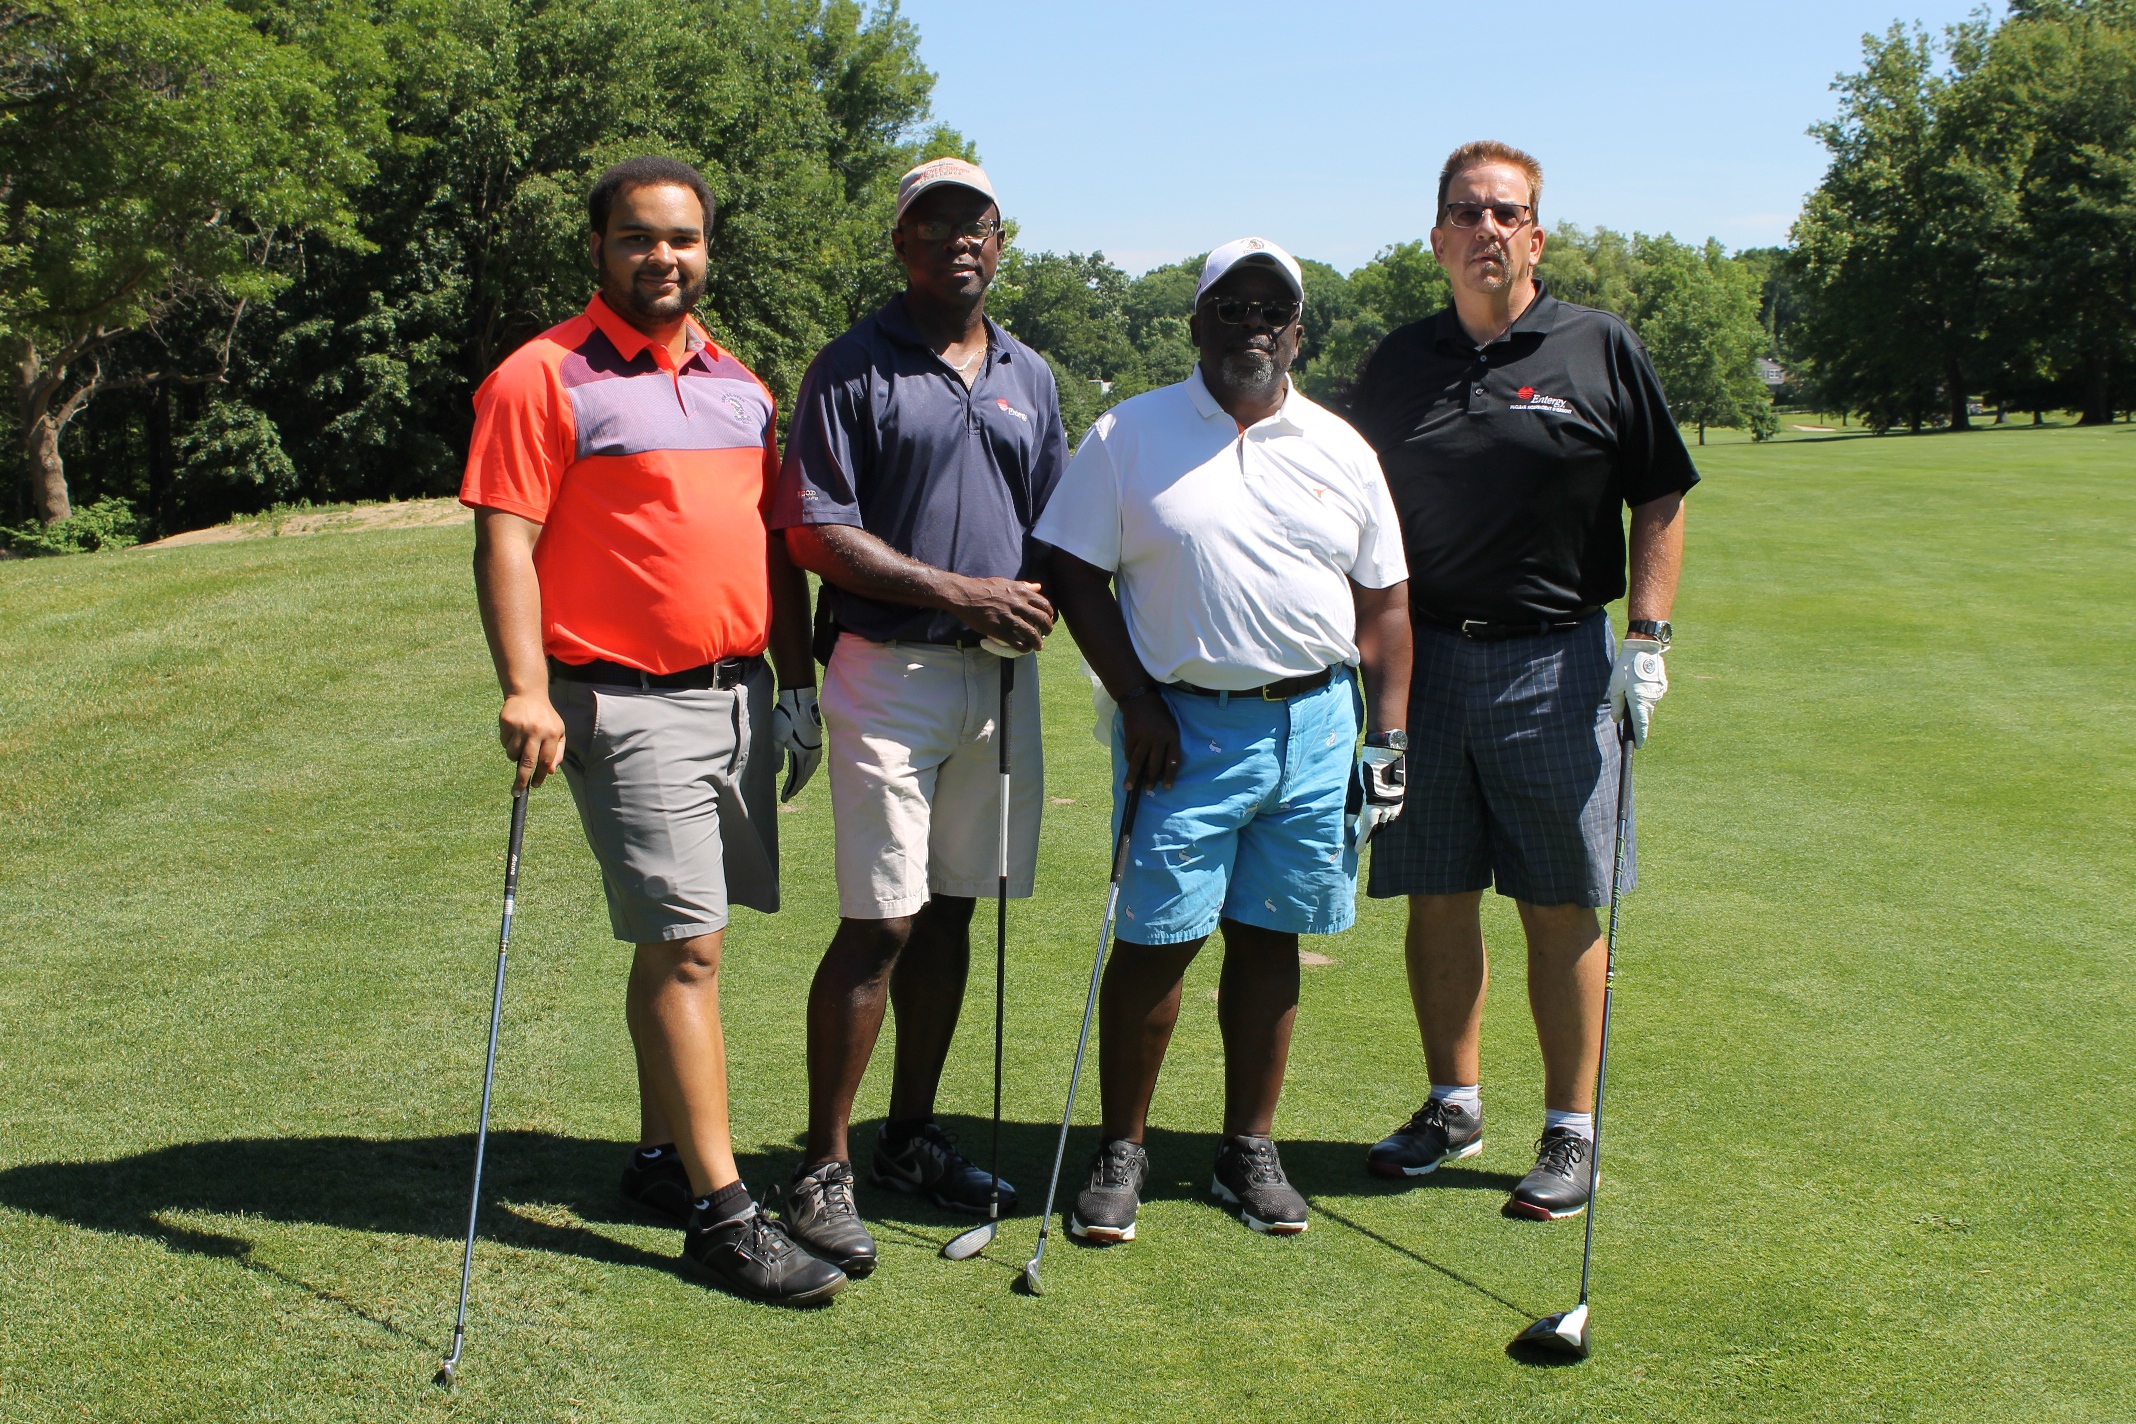 The Entergy foursome at Hospice of Westchester’s 16th Annual Golf Invitational at Westchester Hills Golf Club in White Plains on Tuesday, June 19.